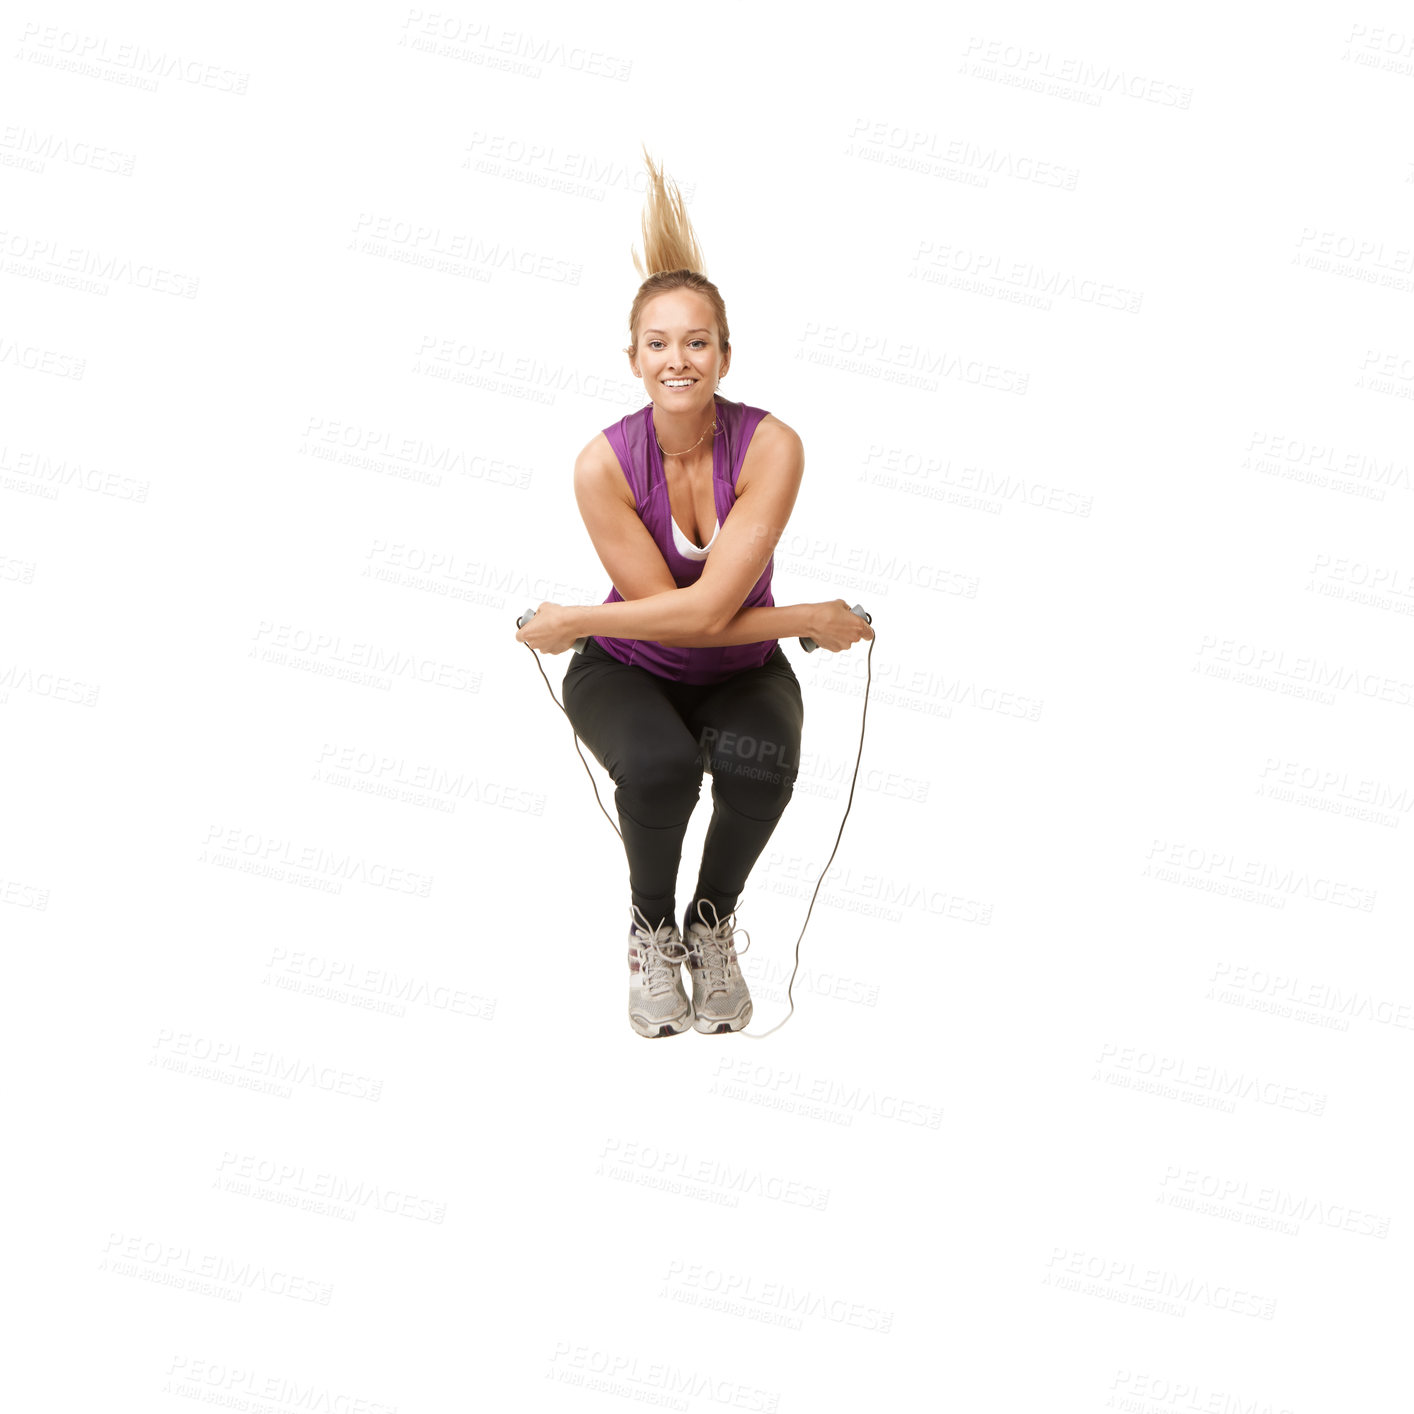 Buy stock photo Portrait of an attractive young woman skipping